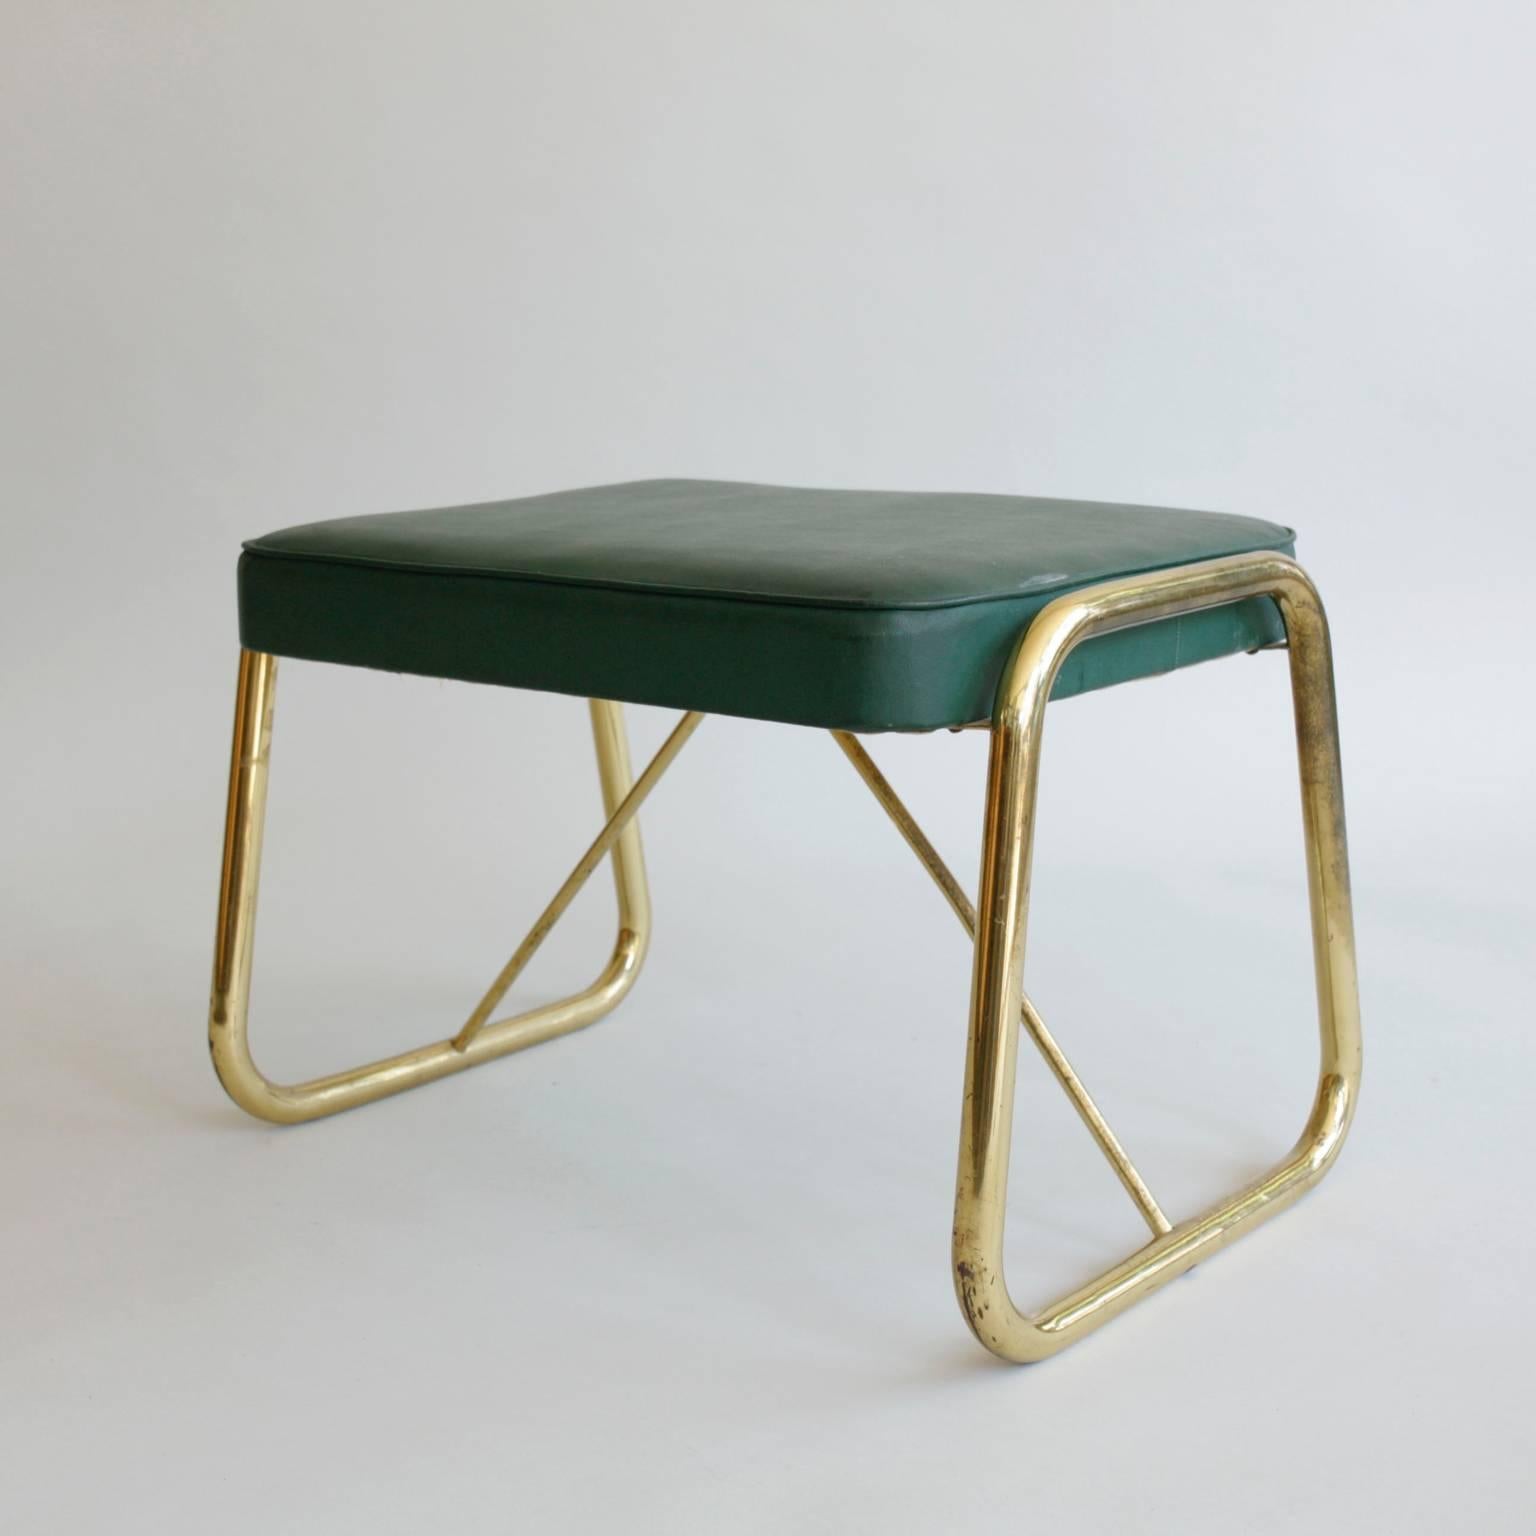 A pair of unusual brass Italian stools with the original green upholstery. Left as found but could be polished and recovered if required.